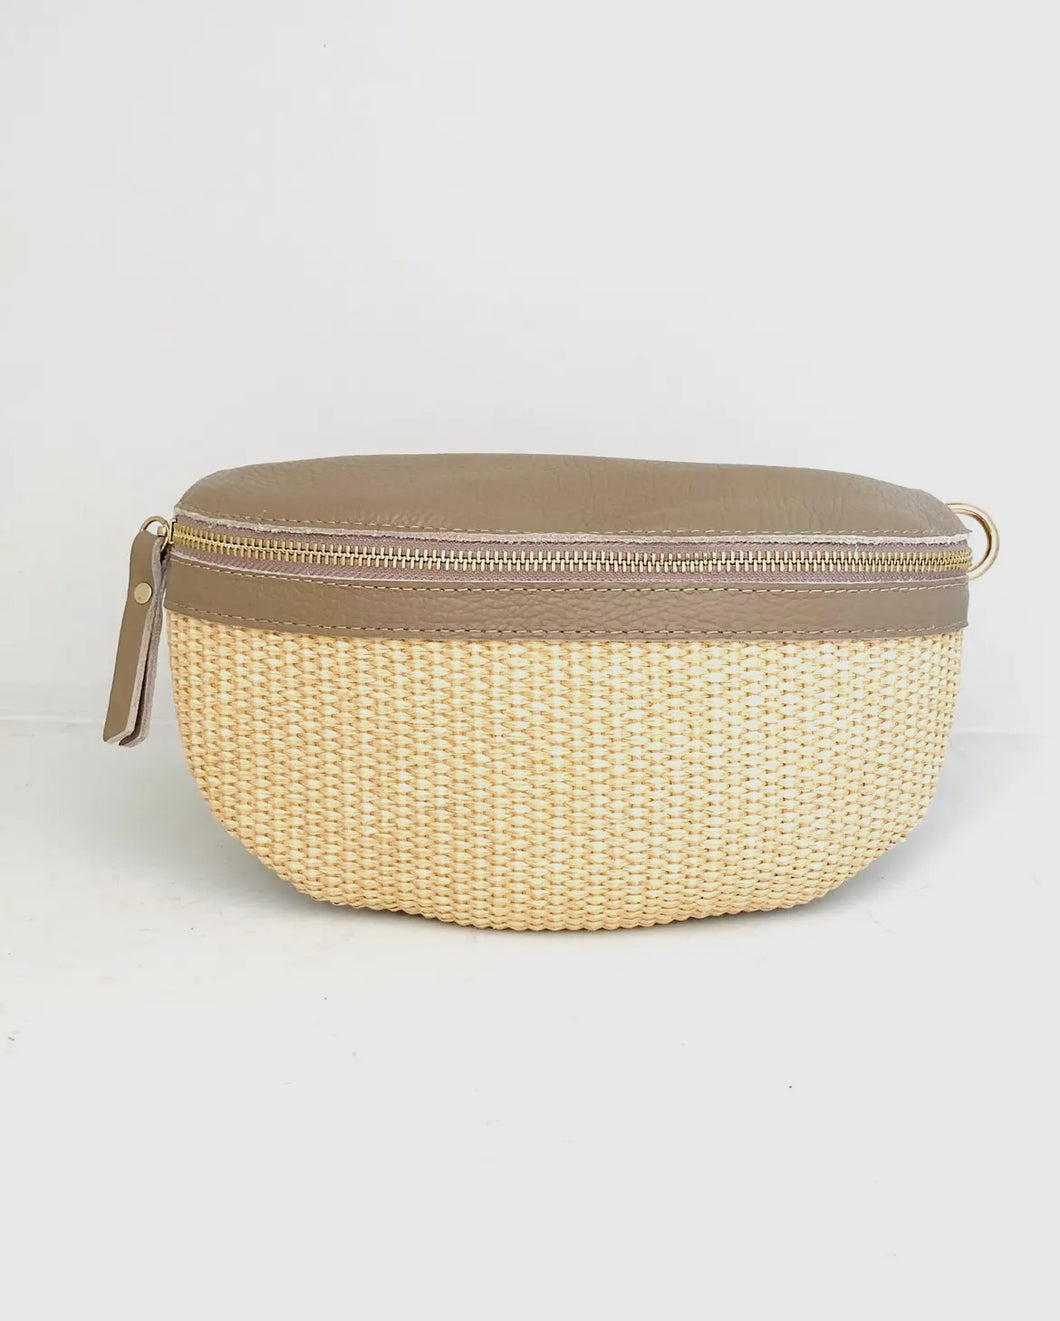 Leather and Rattan Fanny Pack/Cross Body